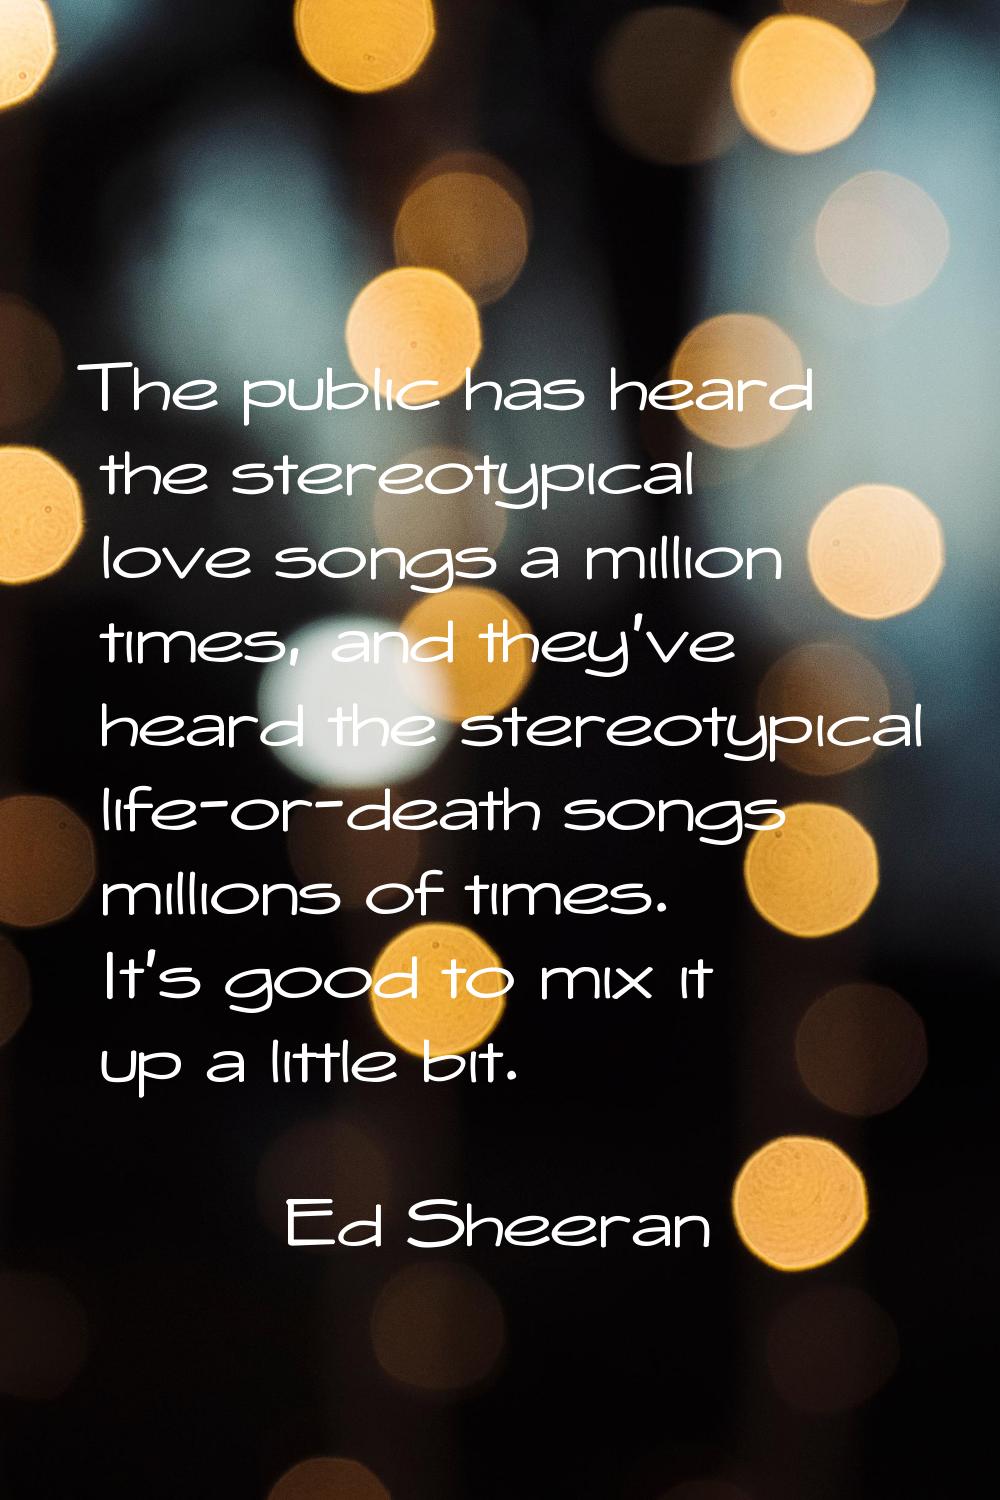 The public has heard the stereotypical love songs a million times, and they've heard the stereotypi